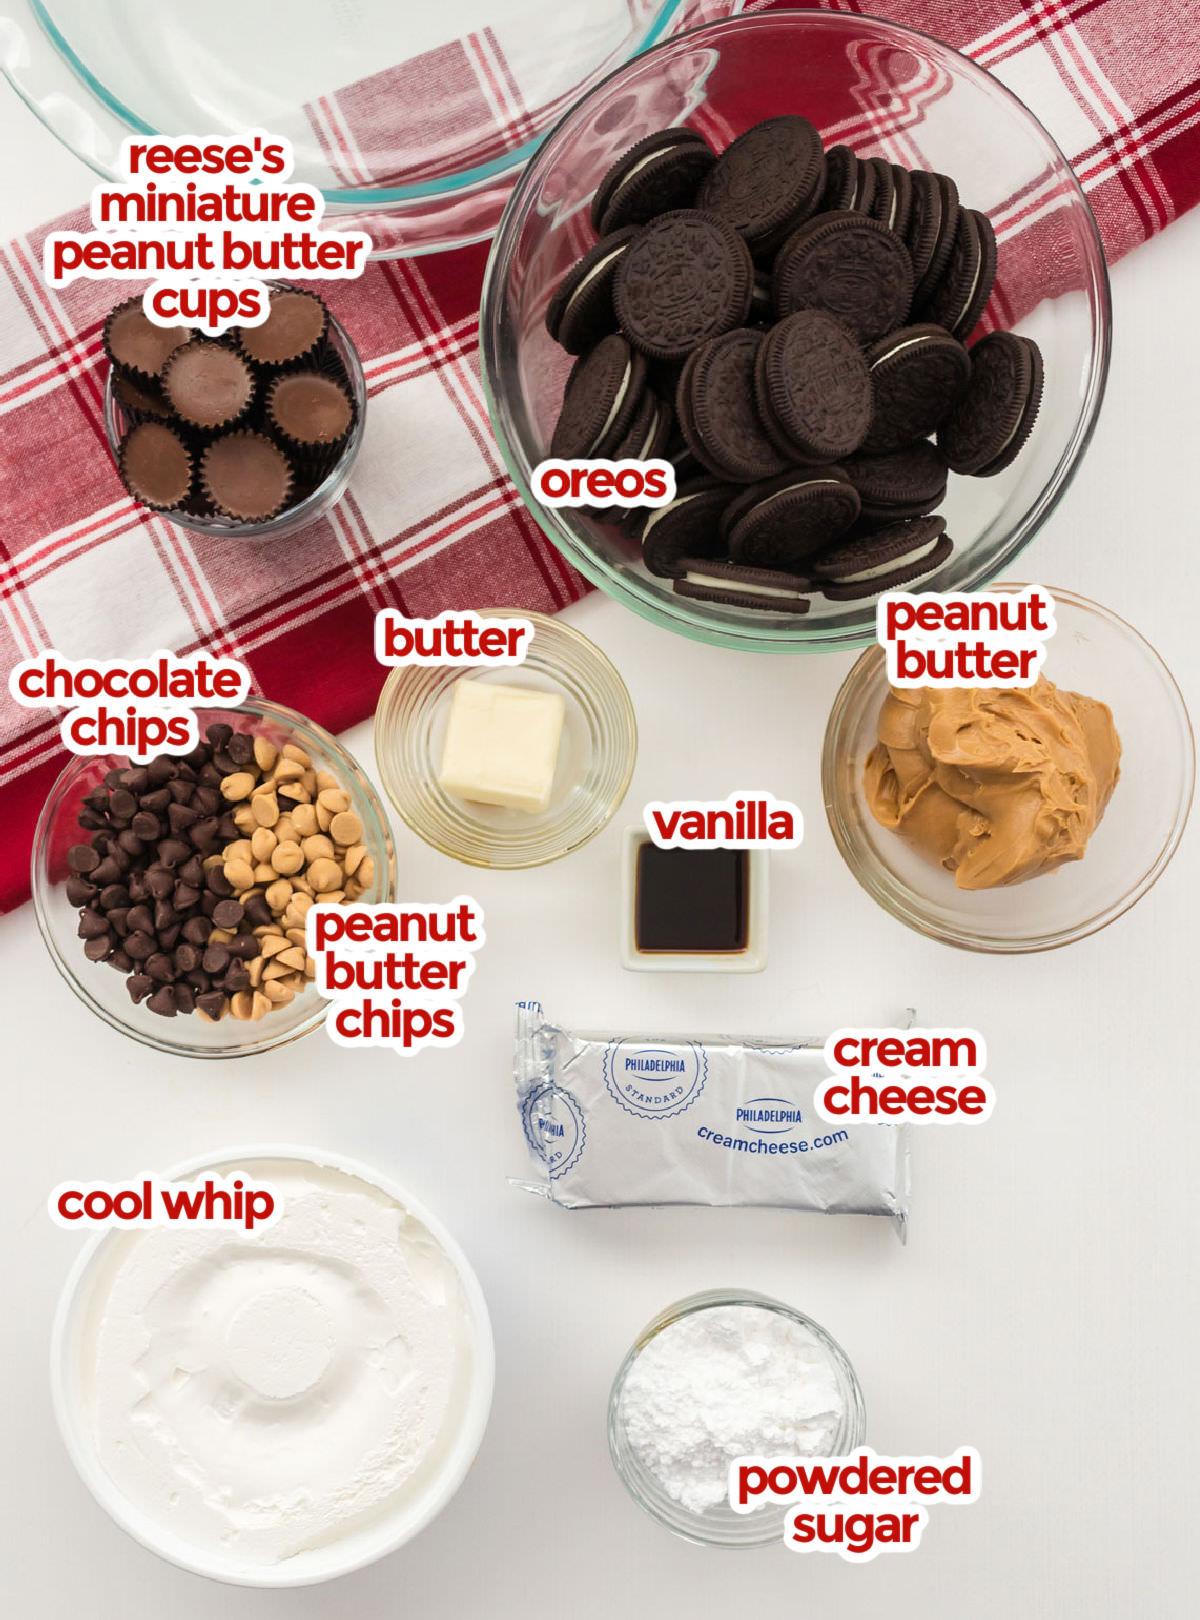 All the ingredients you will need to make Peanut Butter Pie including Oreo Cookies, Peanut Butter Cups, Peanut Butter, Cream Cheese, Cool Whip, Peanut Butter Chips, Chocolate Chips, Vanilla and Powdered Sugar and Butter.